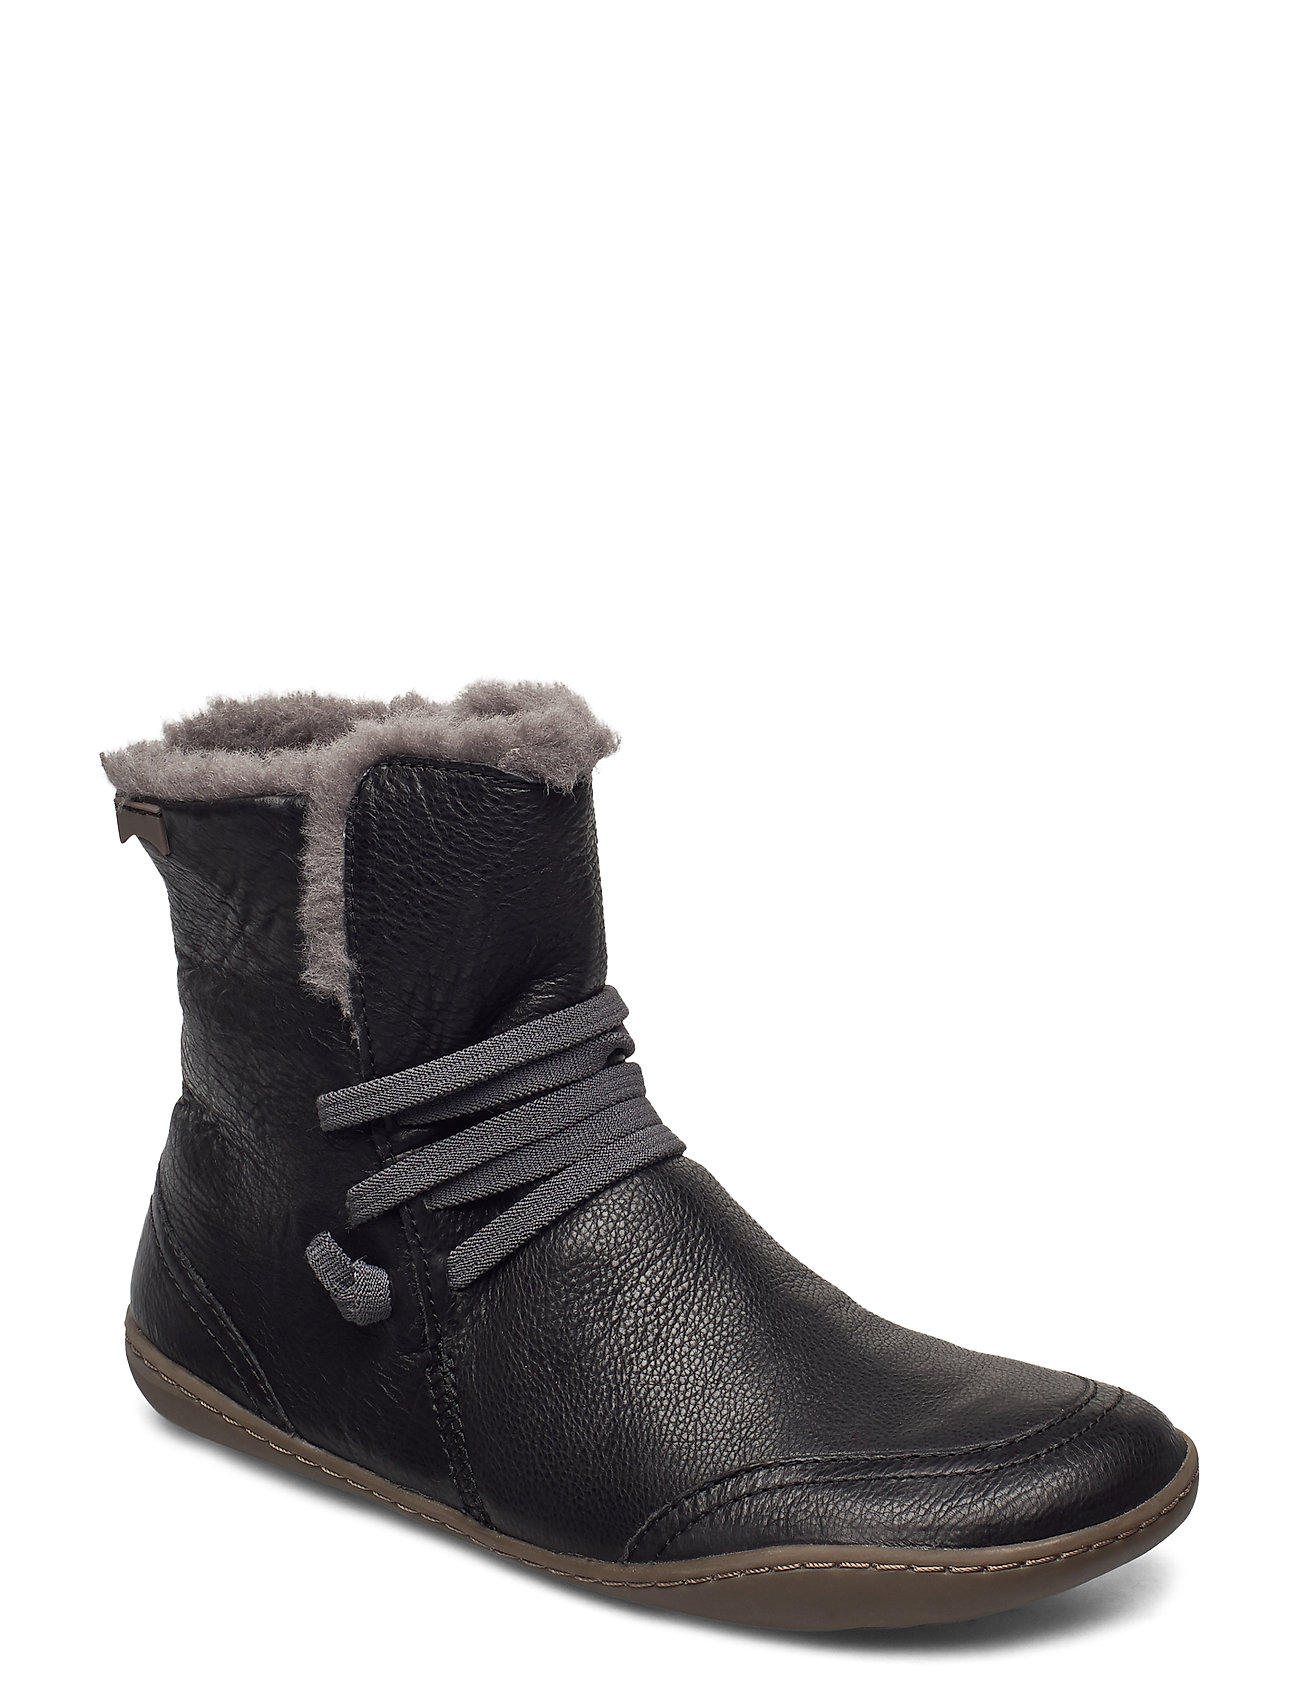 Peu Cami Shoes Boots Ankle Boots Ankle Boot - Flat Musta Camper